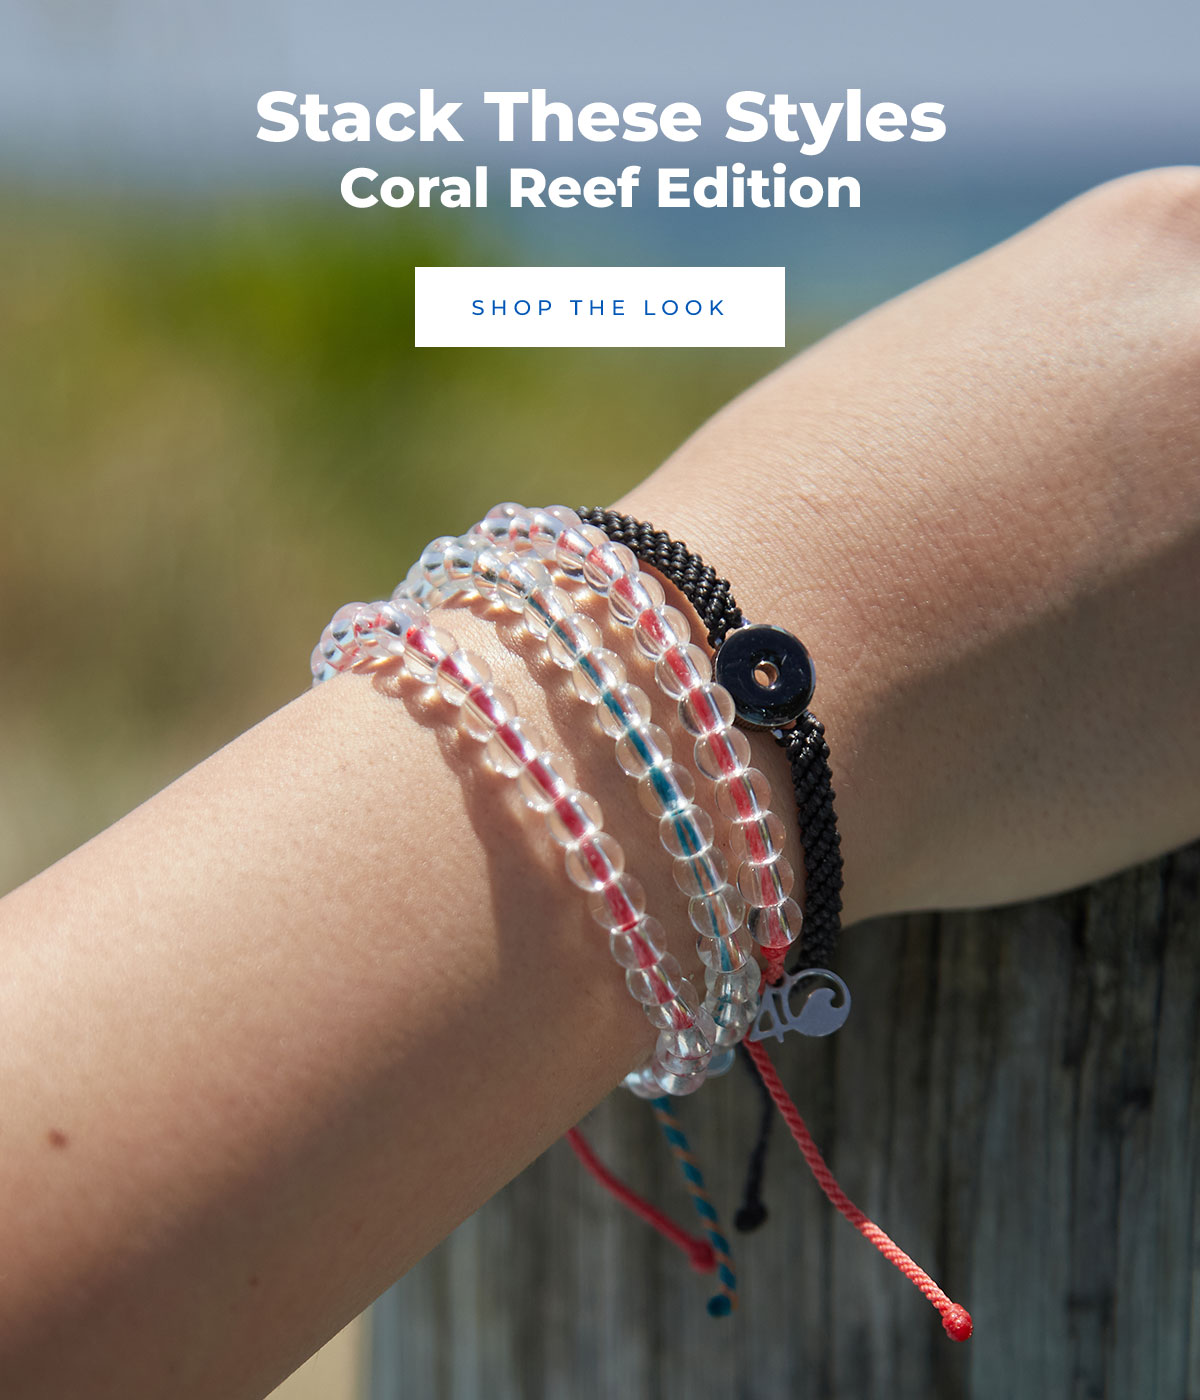 Stack These Styles Coral Reef Edition. Shop the Look